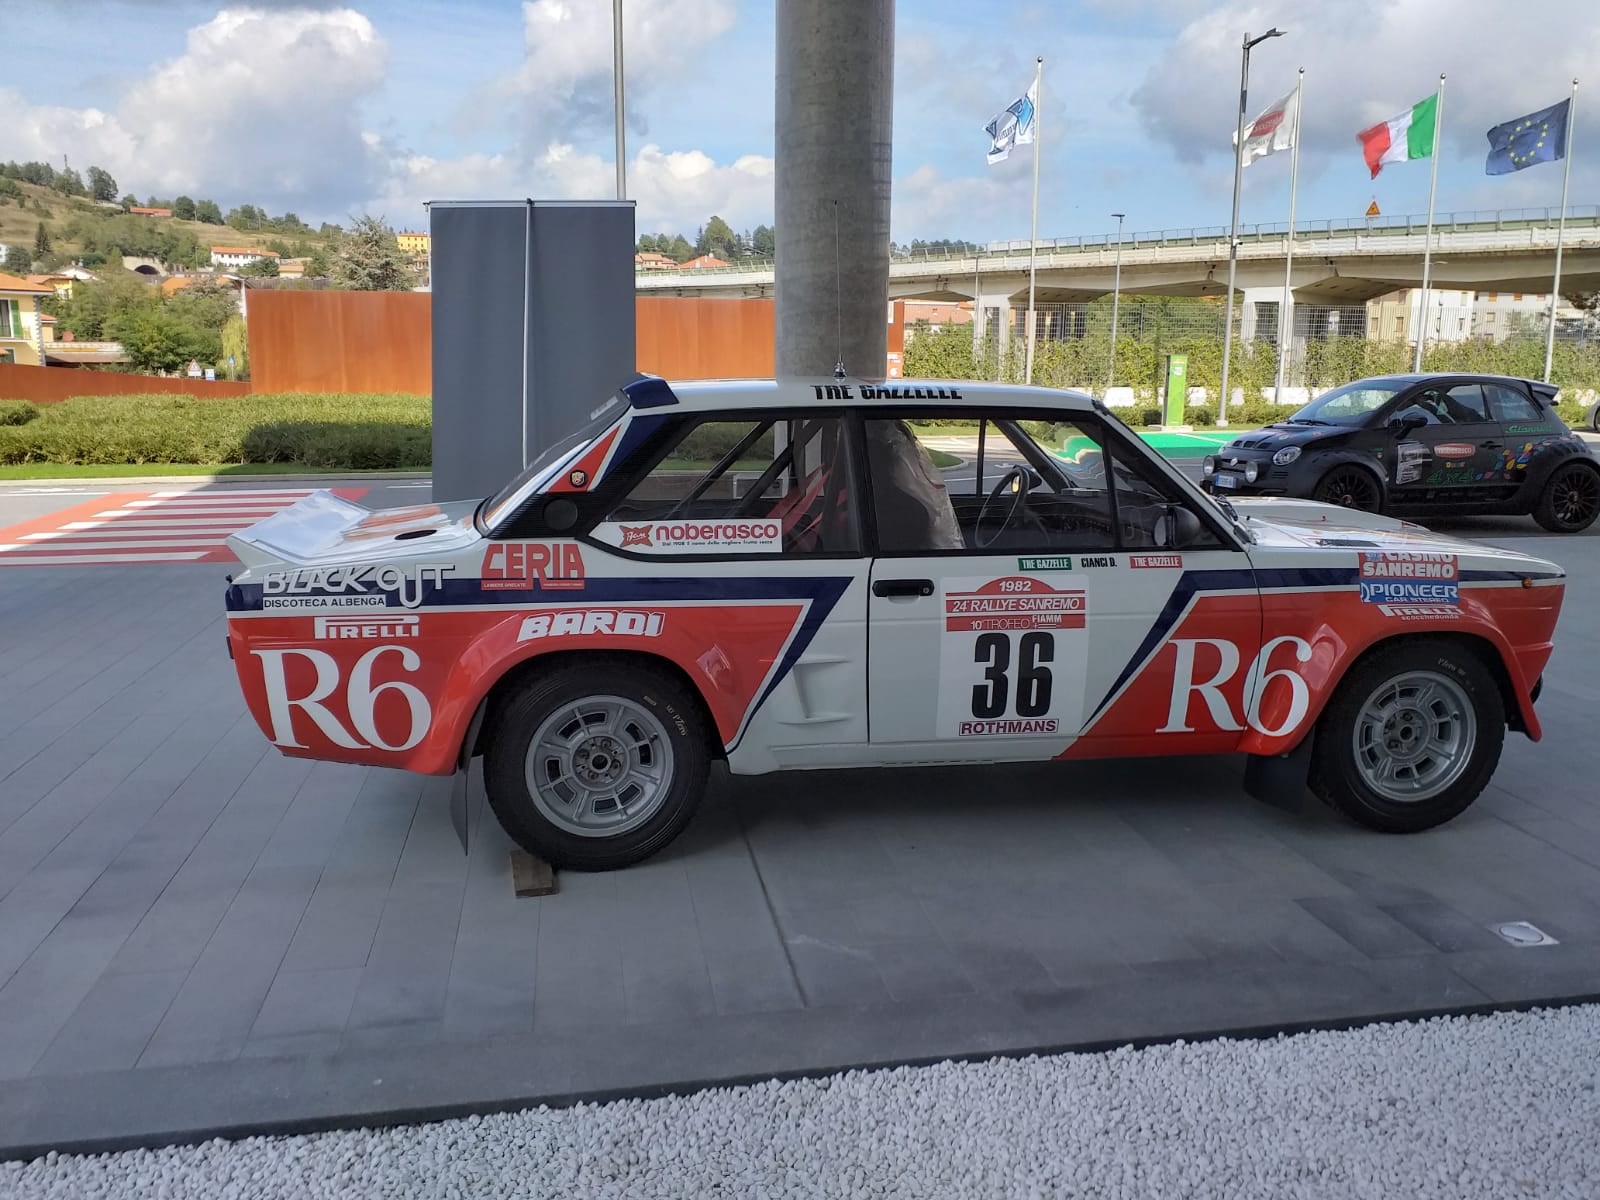 Fiat 131 Abarth Gr.4 R6 Painted Livery